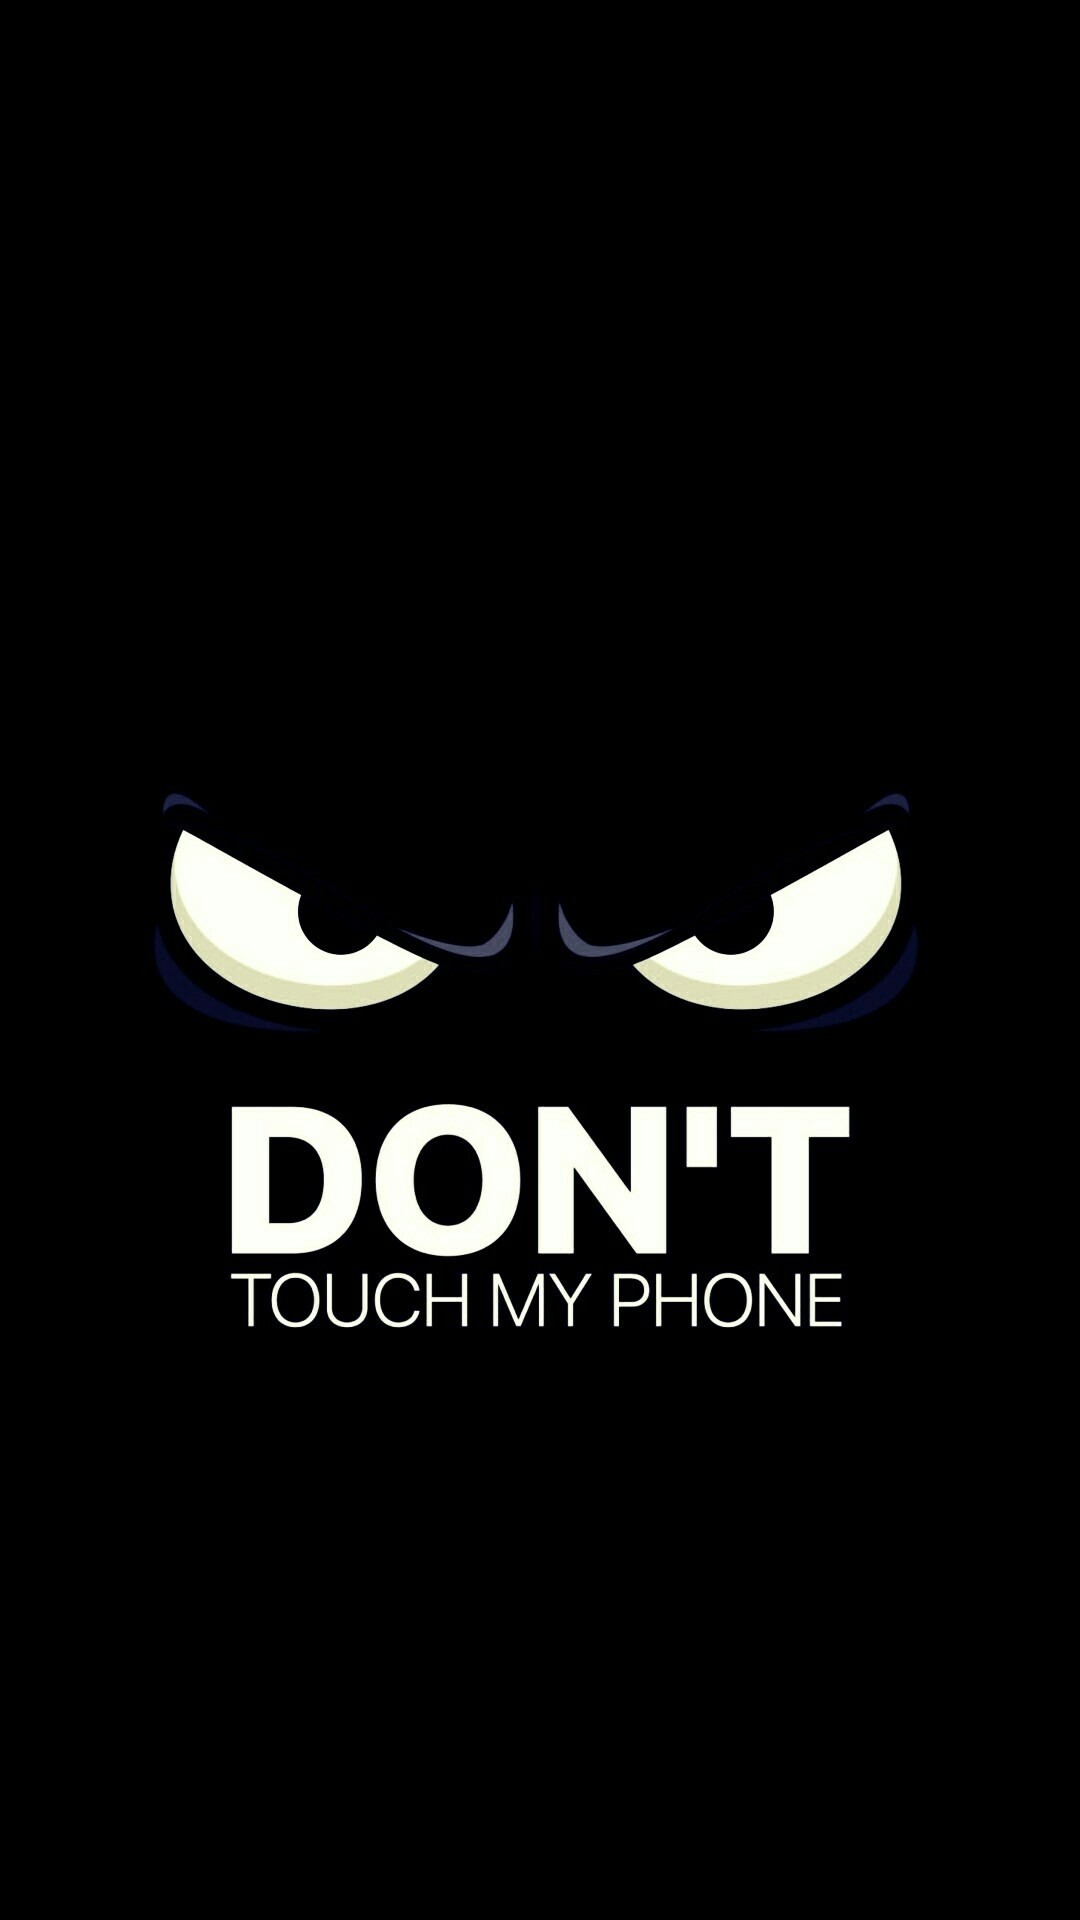 1080x1920 10 Latest Dont Touch My Phone Wallpaper FULL HD 1920Ã1080 For PC Background